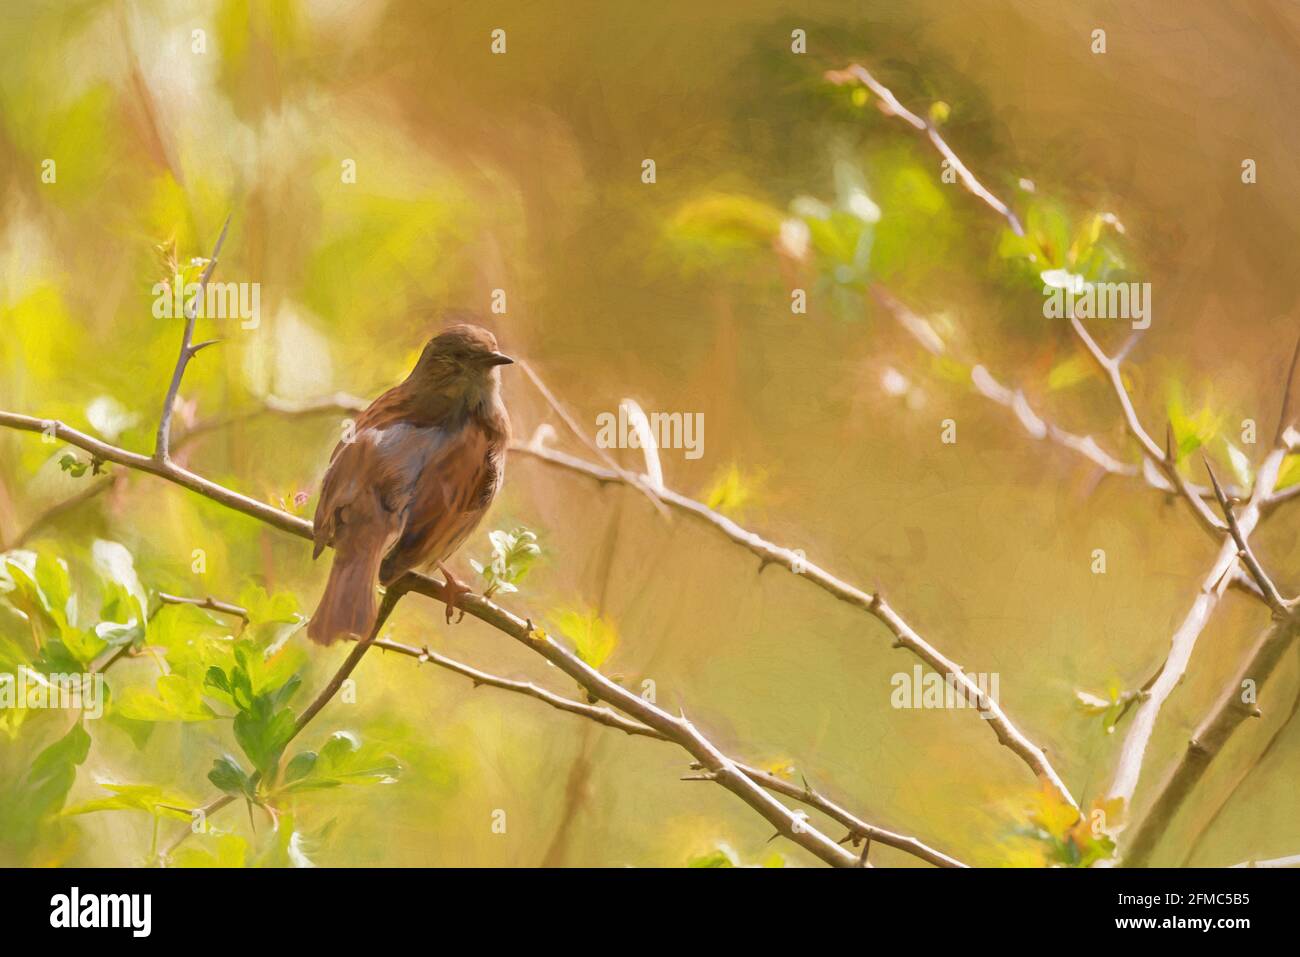 Digital painting of a single Dunnock, Prunella modularis, or hedge accentor, hedge sparrow, or hedge warbler in a tree in the UK Stock Photo